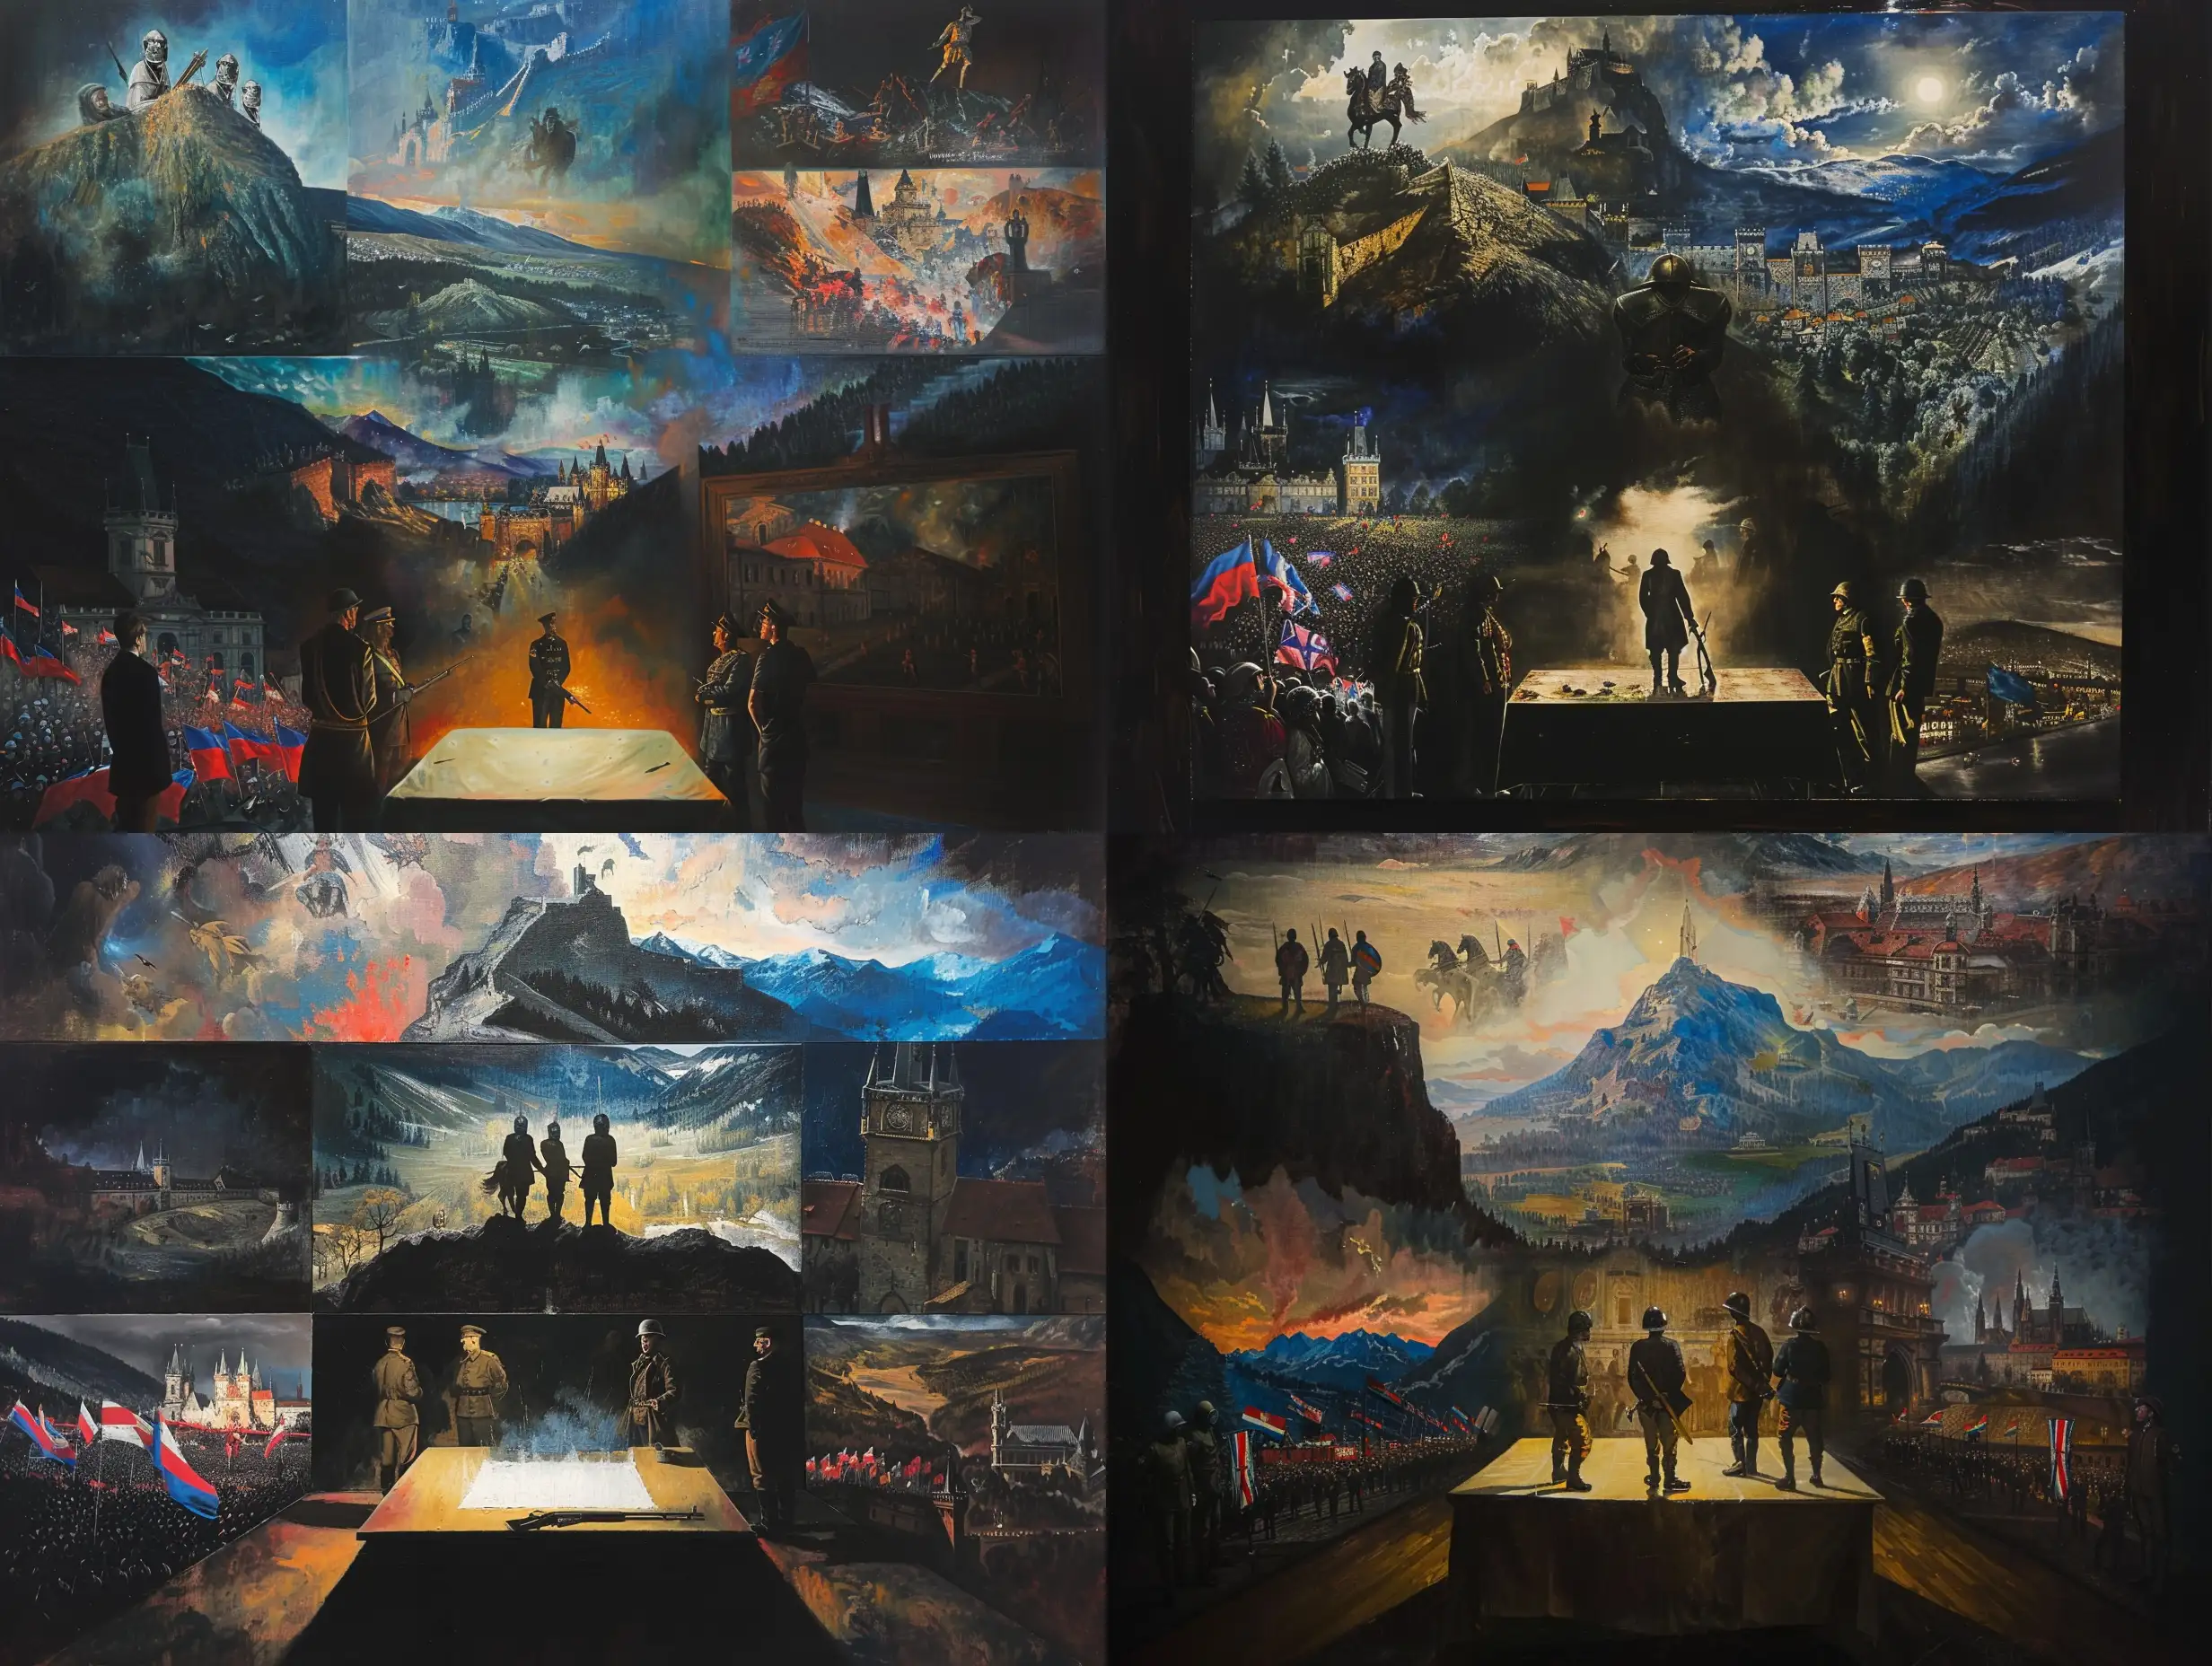 A dark room, a brightly lit table in the middle, with four men standing around it. 
Everything else on the painting seems like a dream, All the scenes are connected, there is no division between them.
At the top left, a dreamy mountain from which medieval knights on horseback ride out. On the upper right, a mountain ridge with forts from the 1930s. The main element of the painting is a Czechoslovak soldier from 1938. He is standing in uniform, wearing a helmet, holding a rifle at his feet. On the bottom left is a scene from a Prague square, with a crowd with red, blue and white flags of Czechoslovakia standing in front of the town hall.